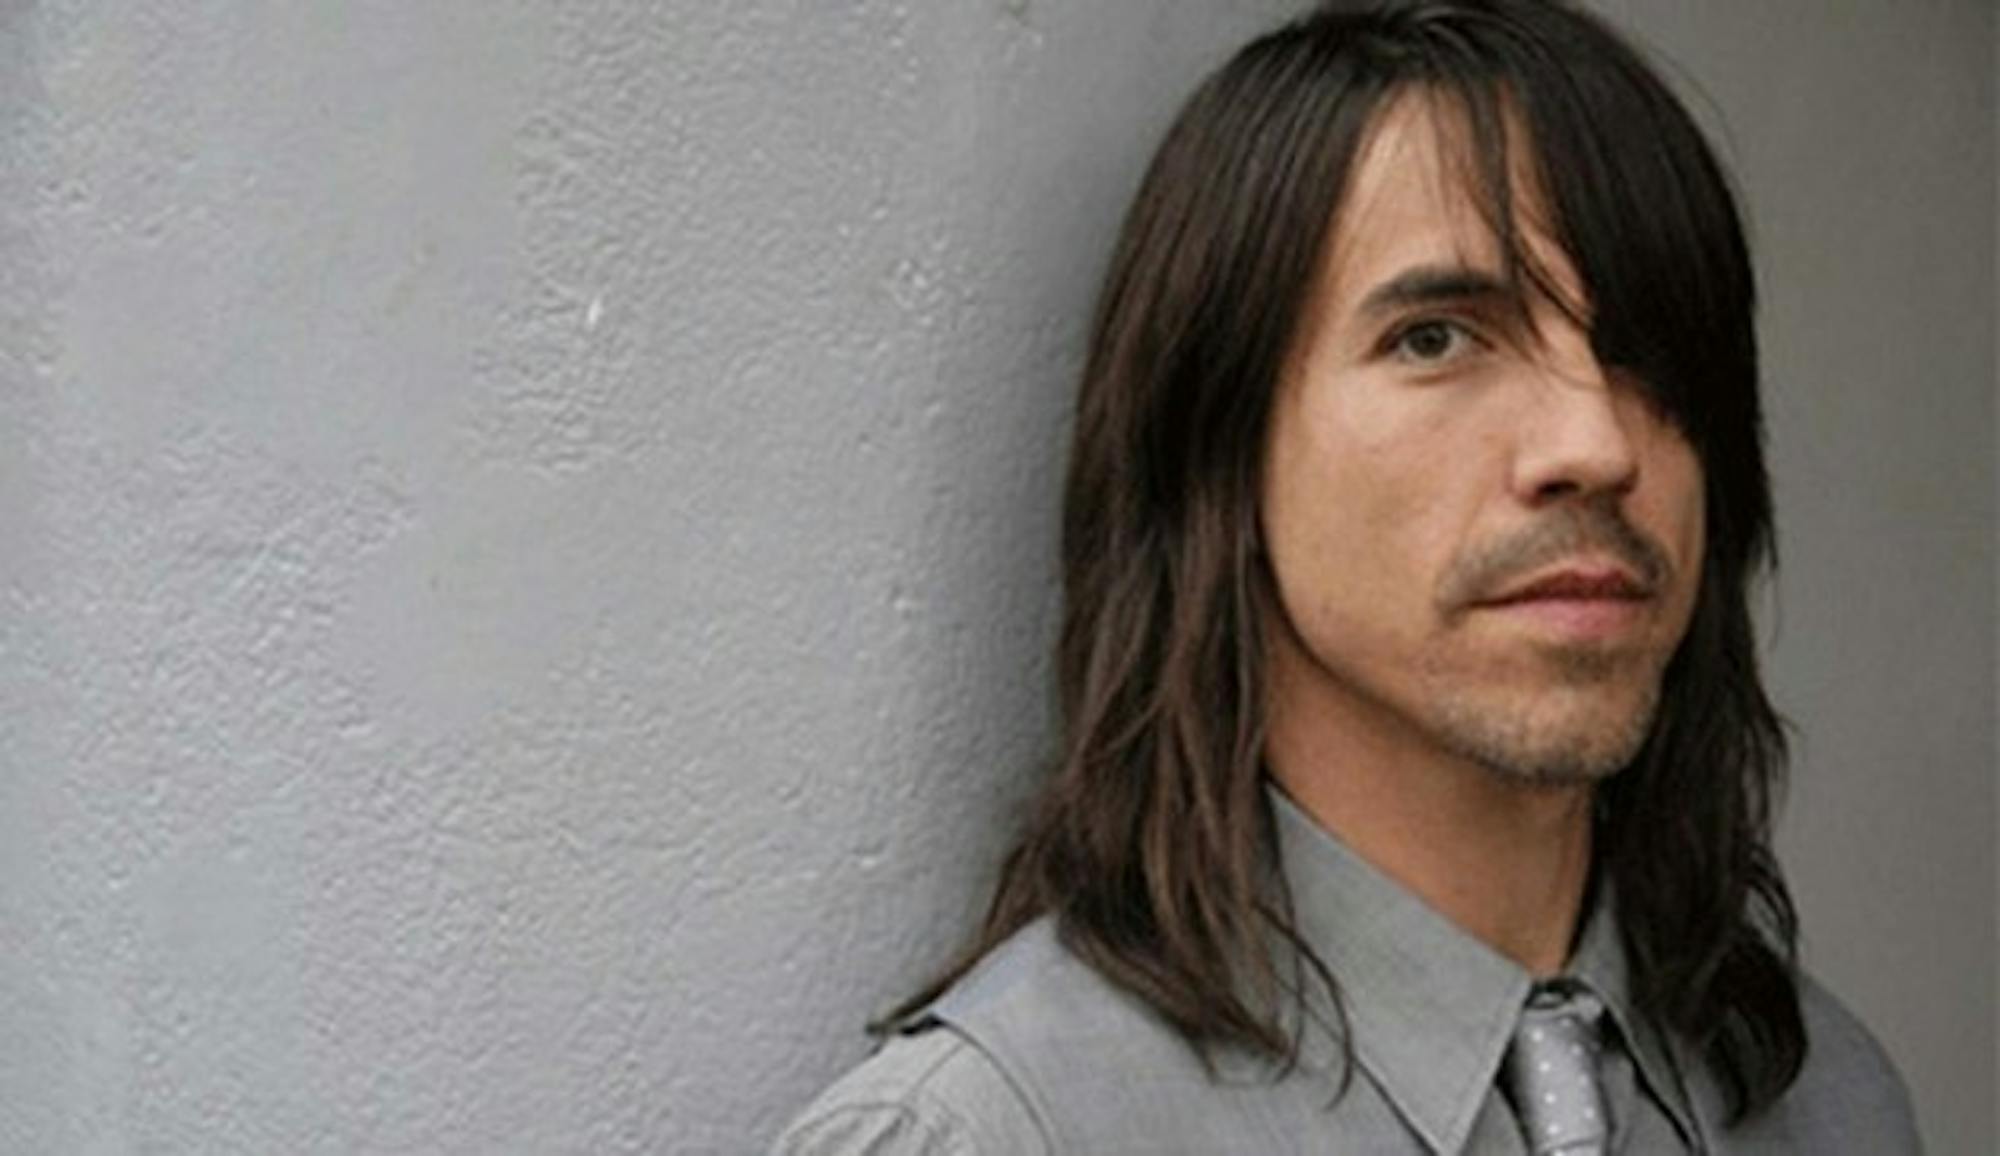 Anthony Kiedis has fronted the Red Hot Chili Peppers for over 20 years.